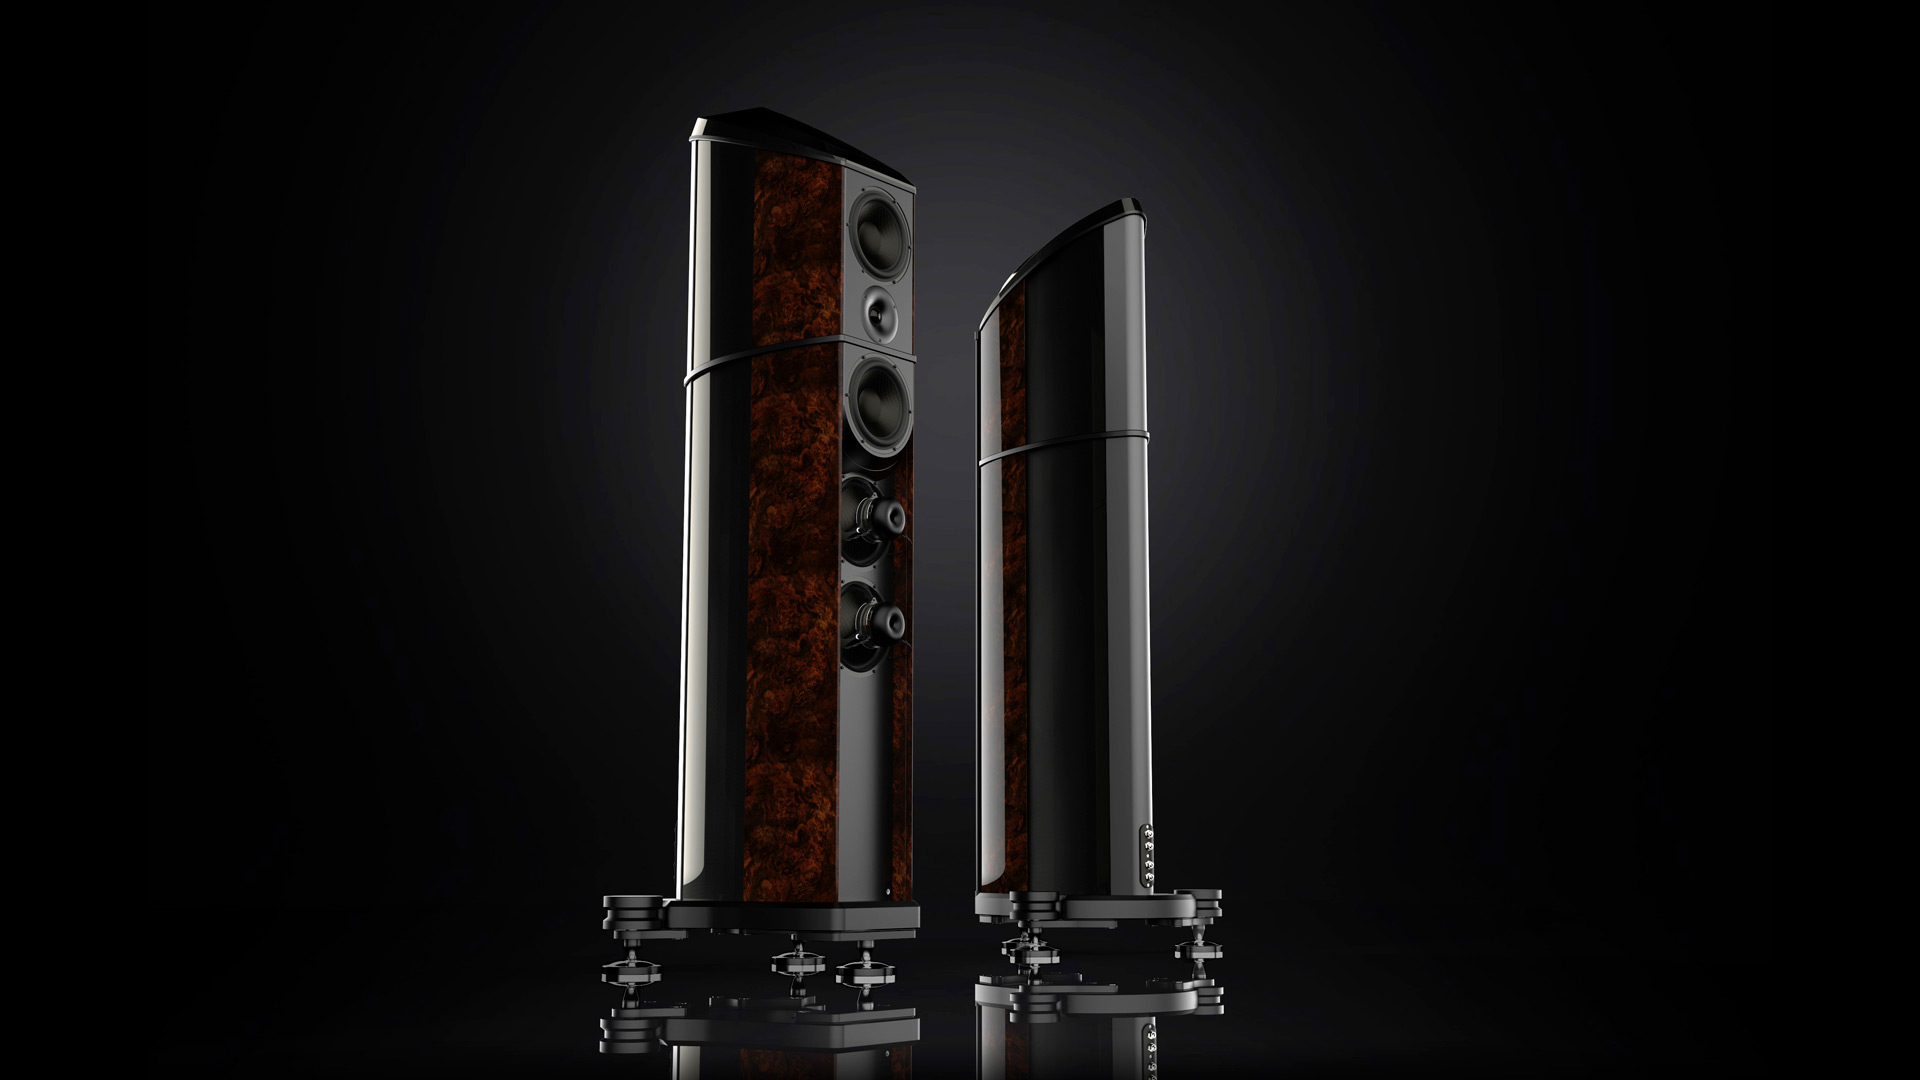 Geometry Series Resolution Loudspeaker launches at Munich HIGH END in May and Los Angeles Audio Show in June